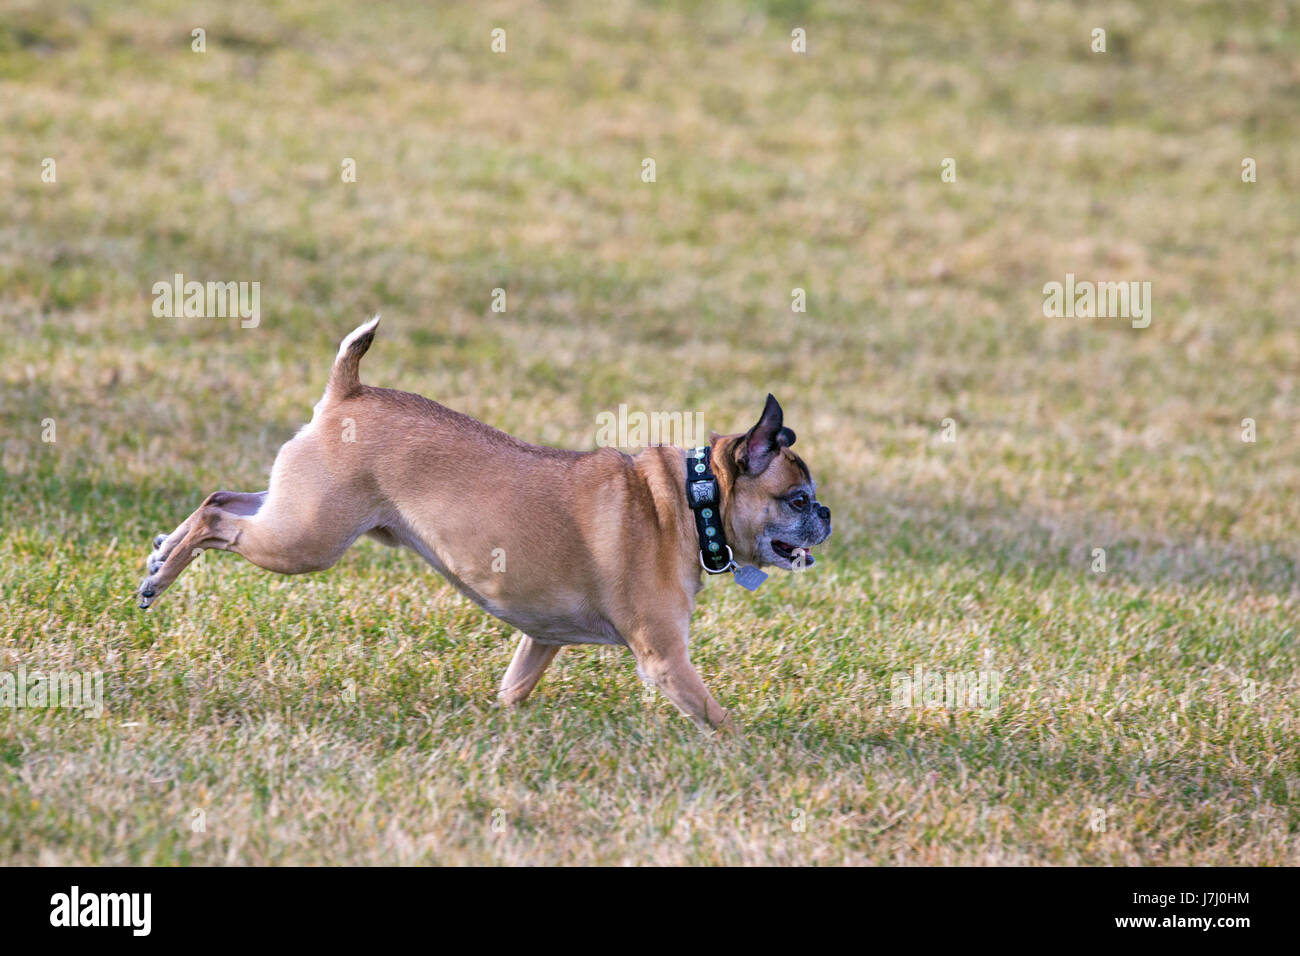 Bugg dog (cross between Boston Terrier and Pug) running free in city